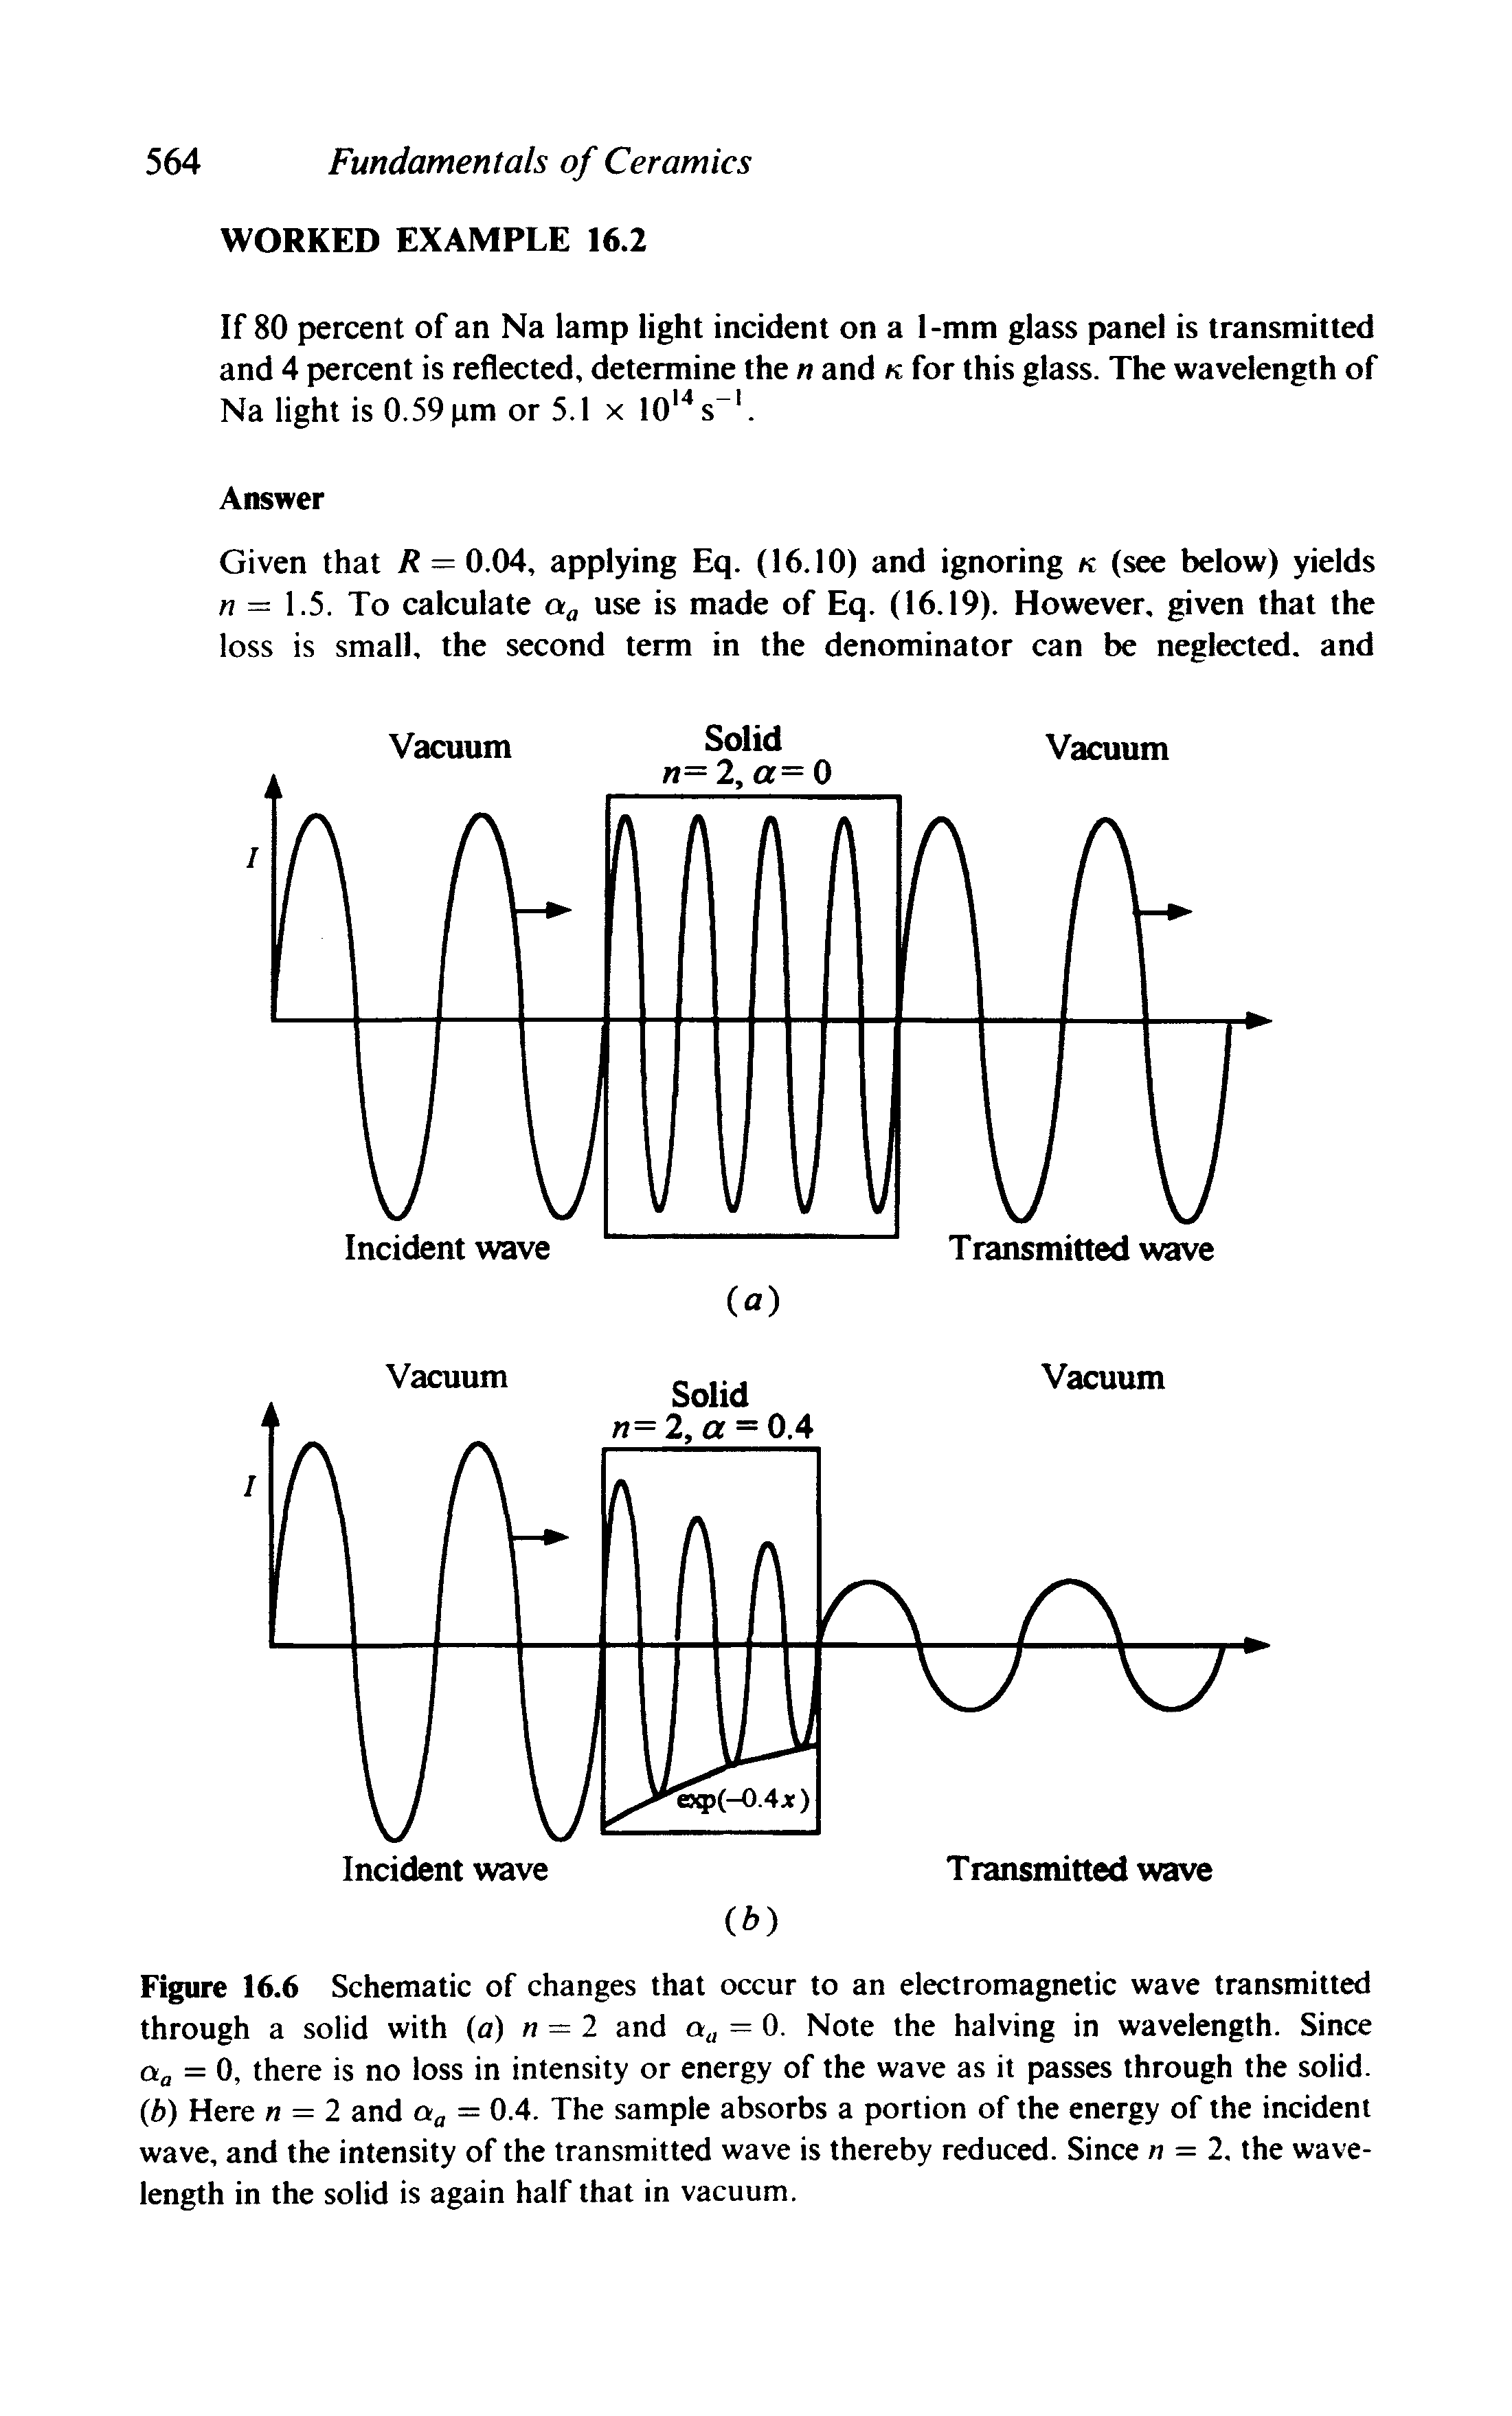 Figure 16.6 Schematic of changes that occur to an electromagnetic wave transmitted through a solid with (a) n = 2 and q, = 0. Note the halving in wavelength. Since Oq = 0, there is no loss in intensity or energy of the wave as it passes through the solid. (b) Here n = 2 and Oa = 0.4. The sample absorbs a portion of the energy of the incident wave, and the intensity of the transmitted wave is thereby reduced. Since n = 2. the wavelength in the solid is again half that in vacuum.